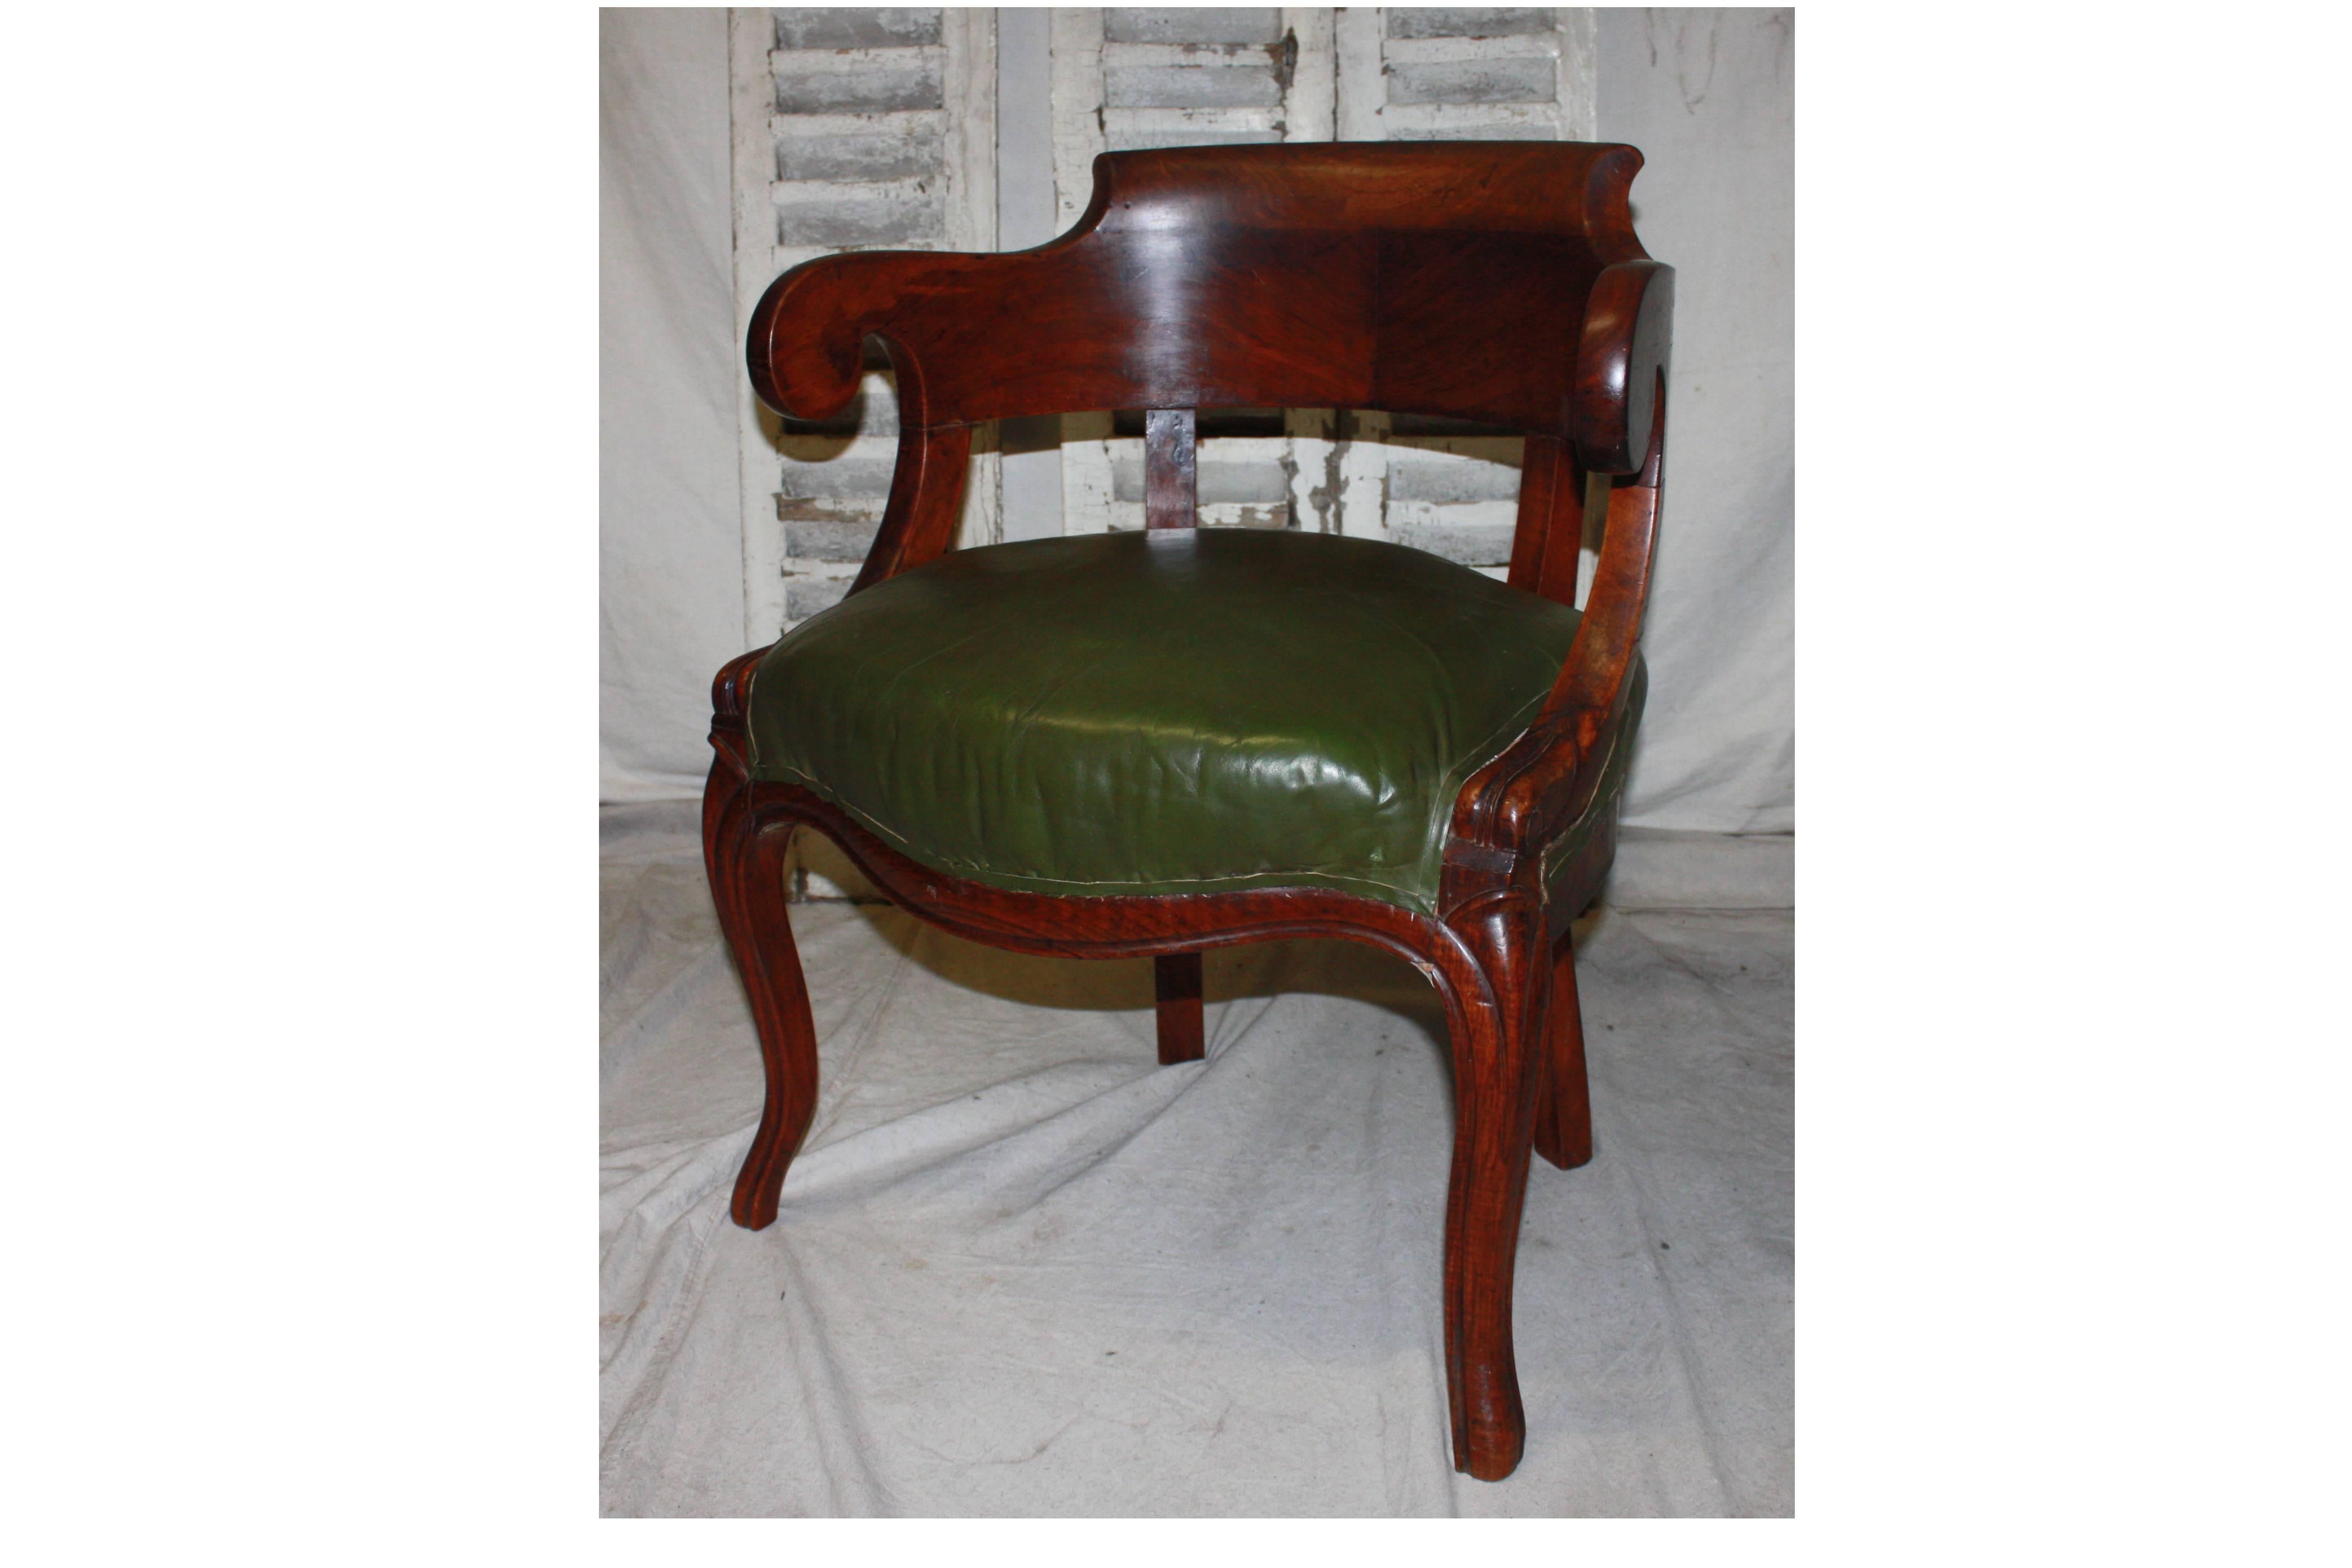 19th century French desk chair.